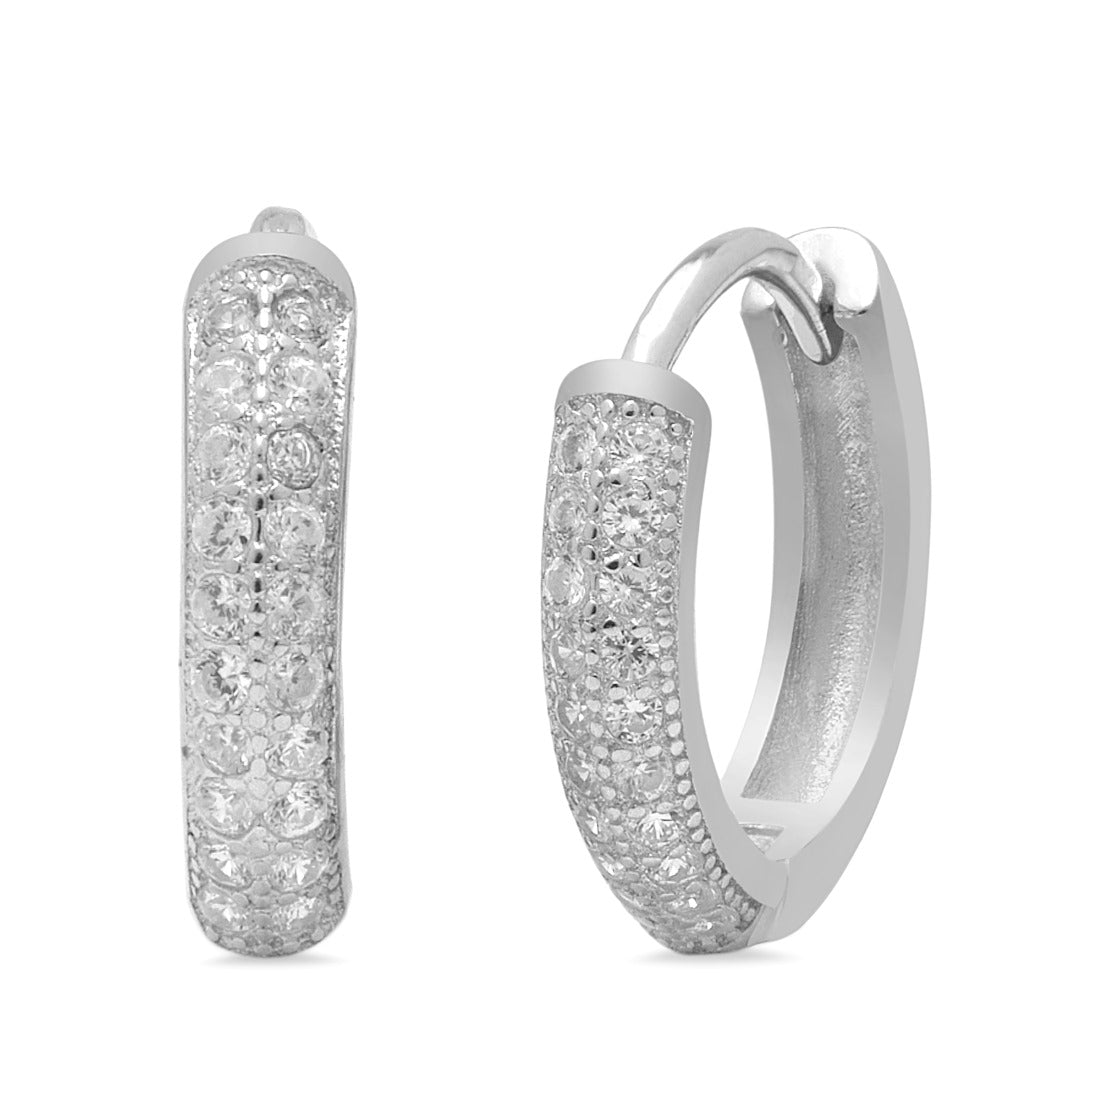 Limitless Charm Cubic Zirconia Rhodium Plated 925 Sterling Silver Earrings